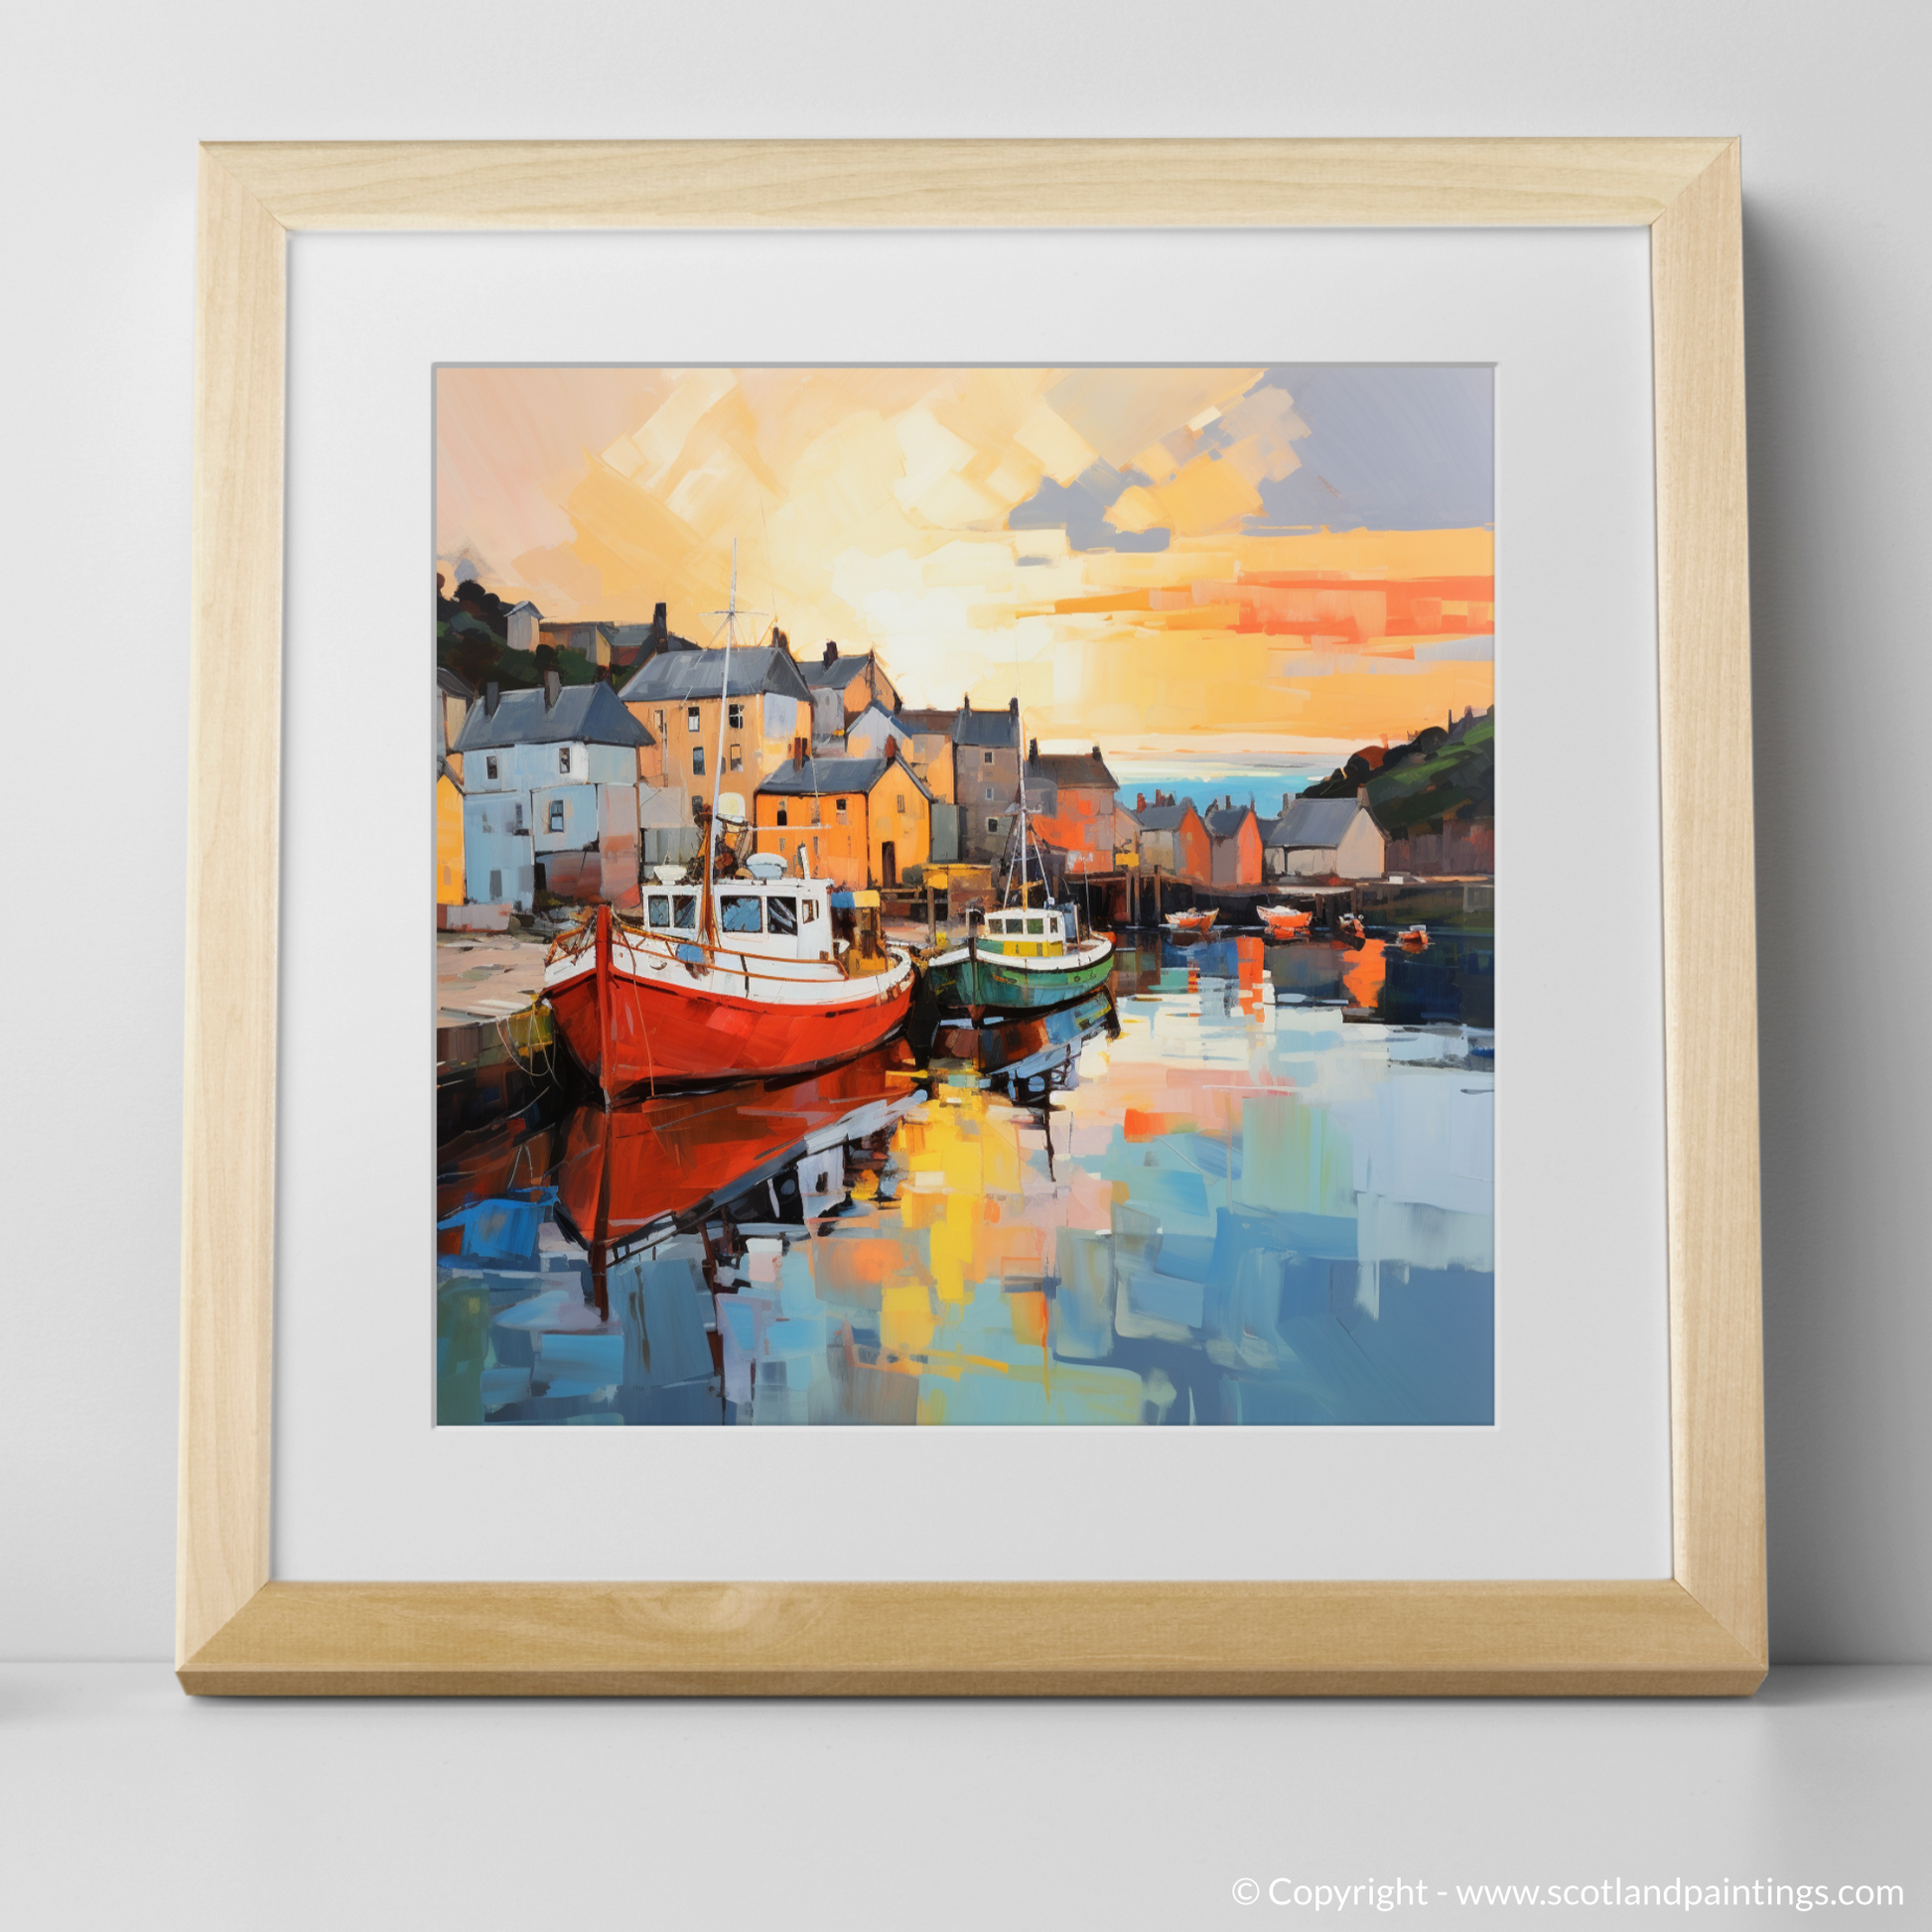 Art Print of Millport Harbour at golden hour with a natural frame